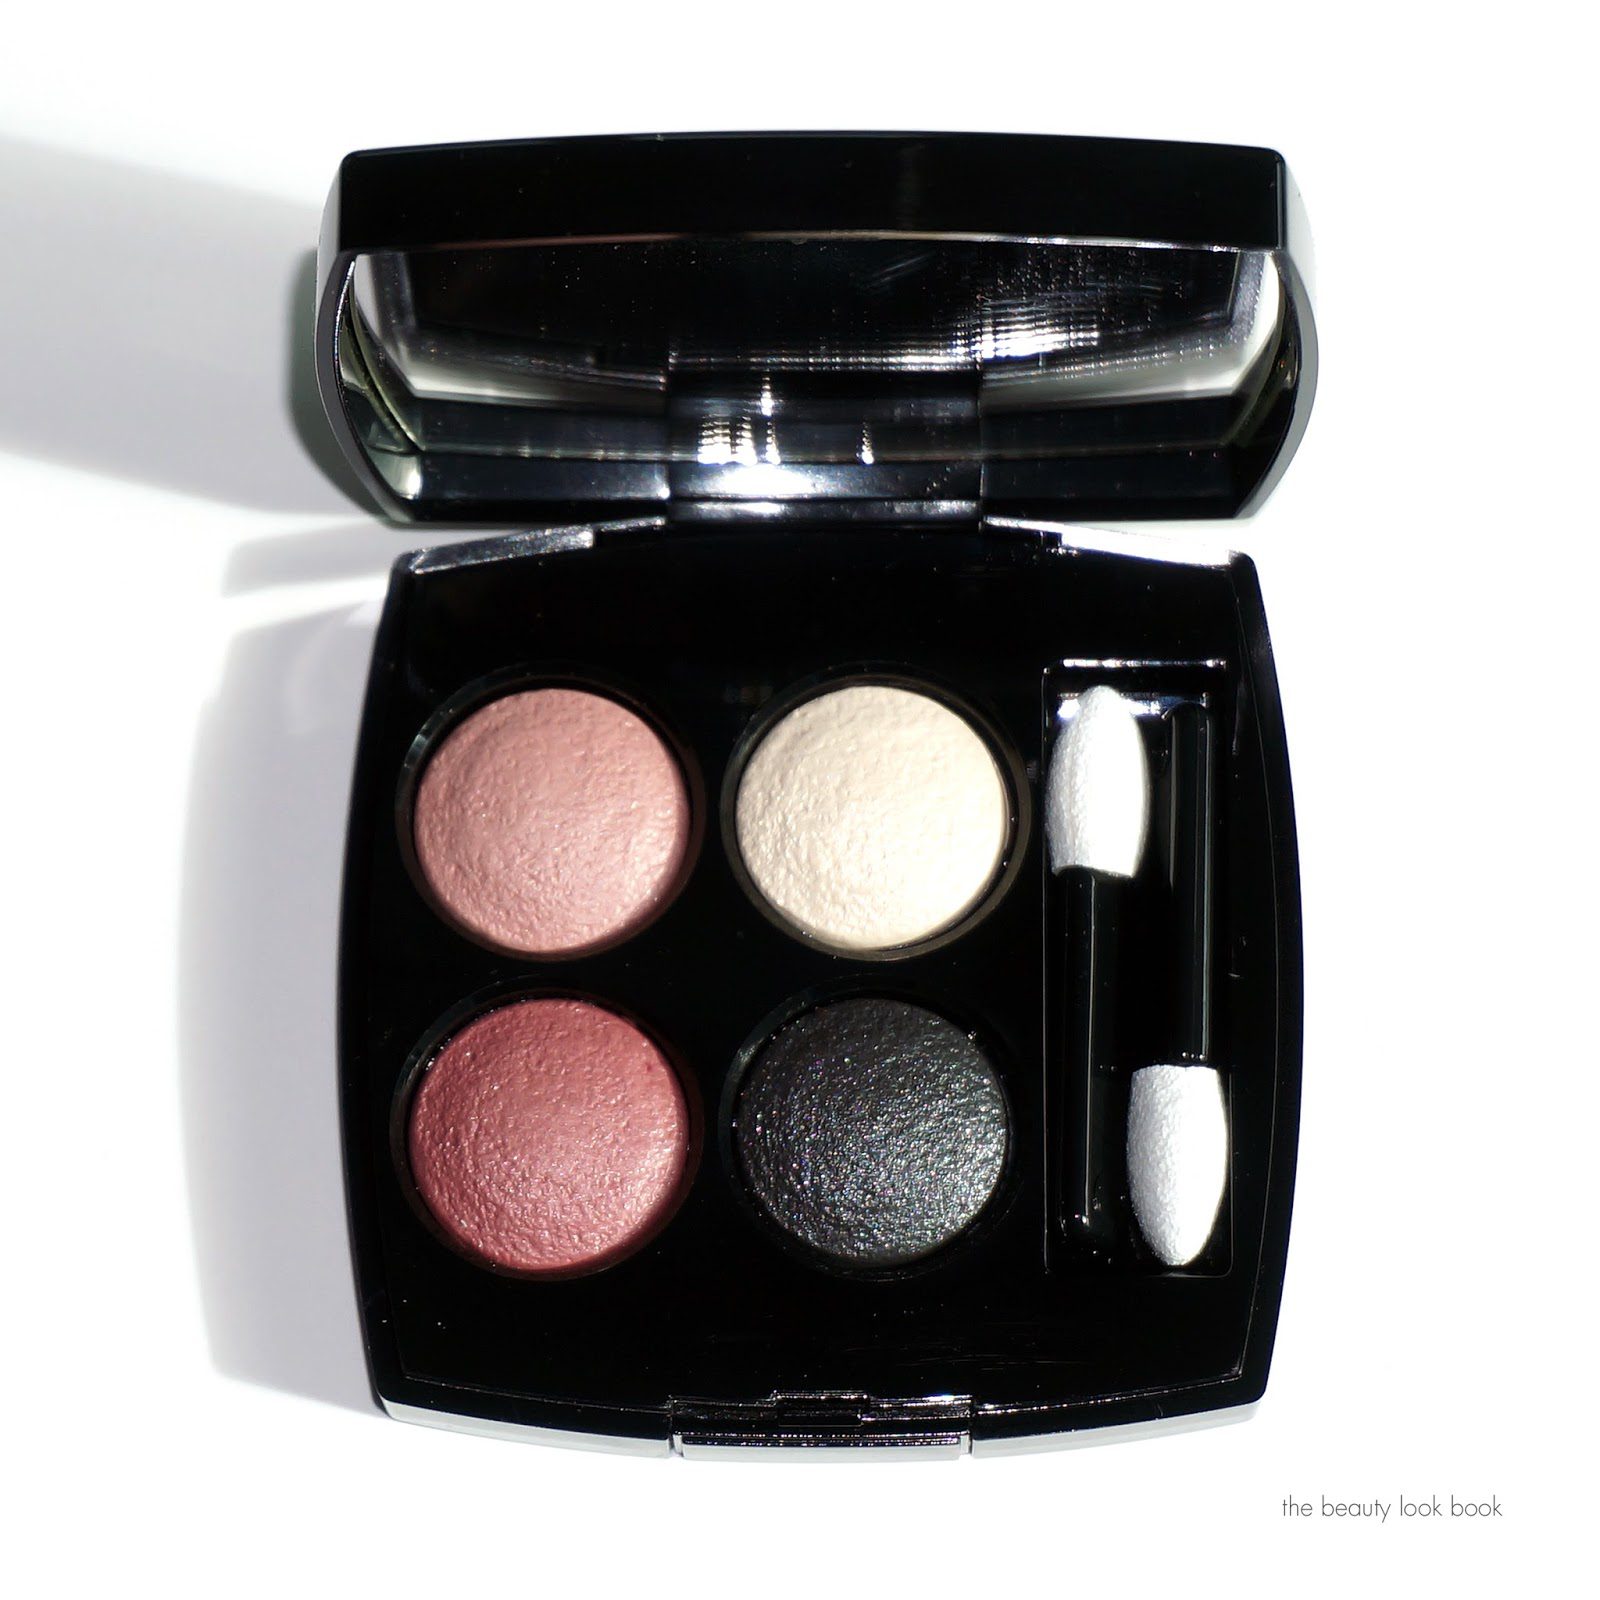 Chanel Illusion D'Ombre New Moon and Mysterio – Ang Savvy